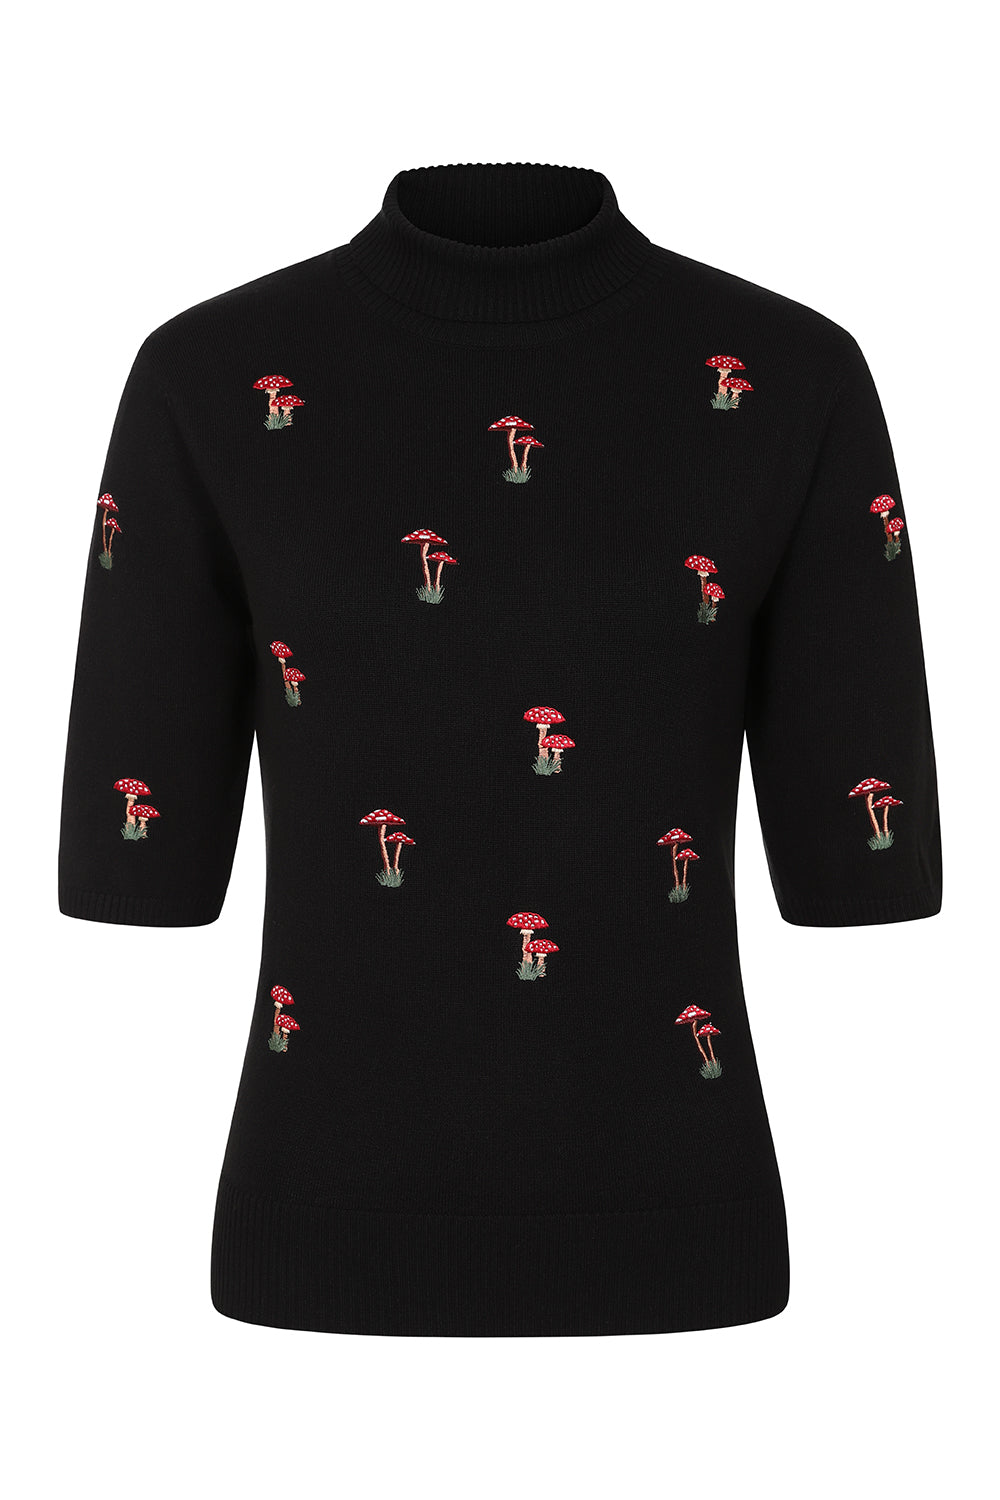 Black elbow length sleeved turtleneck sweater with ribbed neck and cuffs. Embroidered toadstool mushrooms in red, white, and brown across the front body and sleeves of the sweater. Shown from front